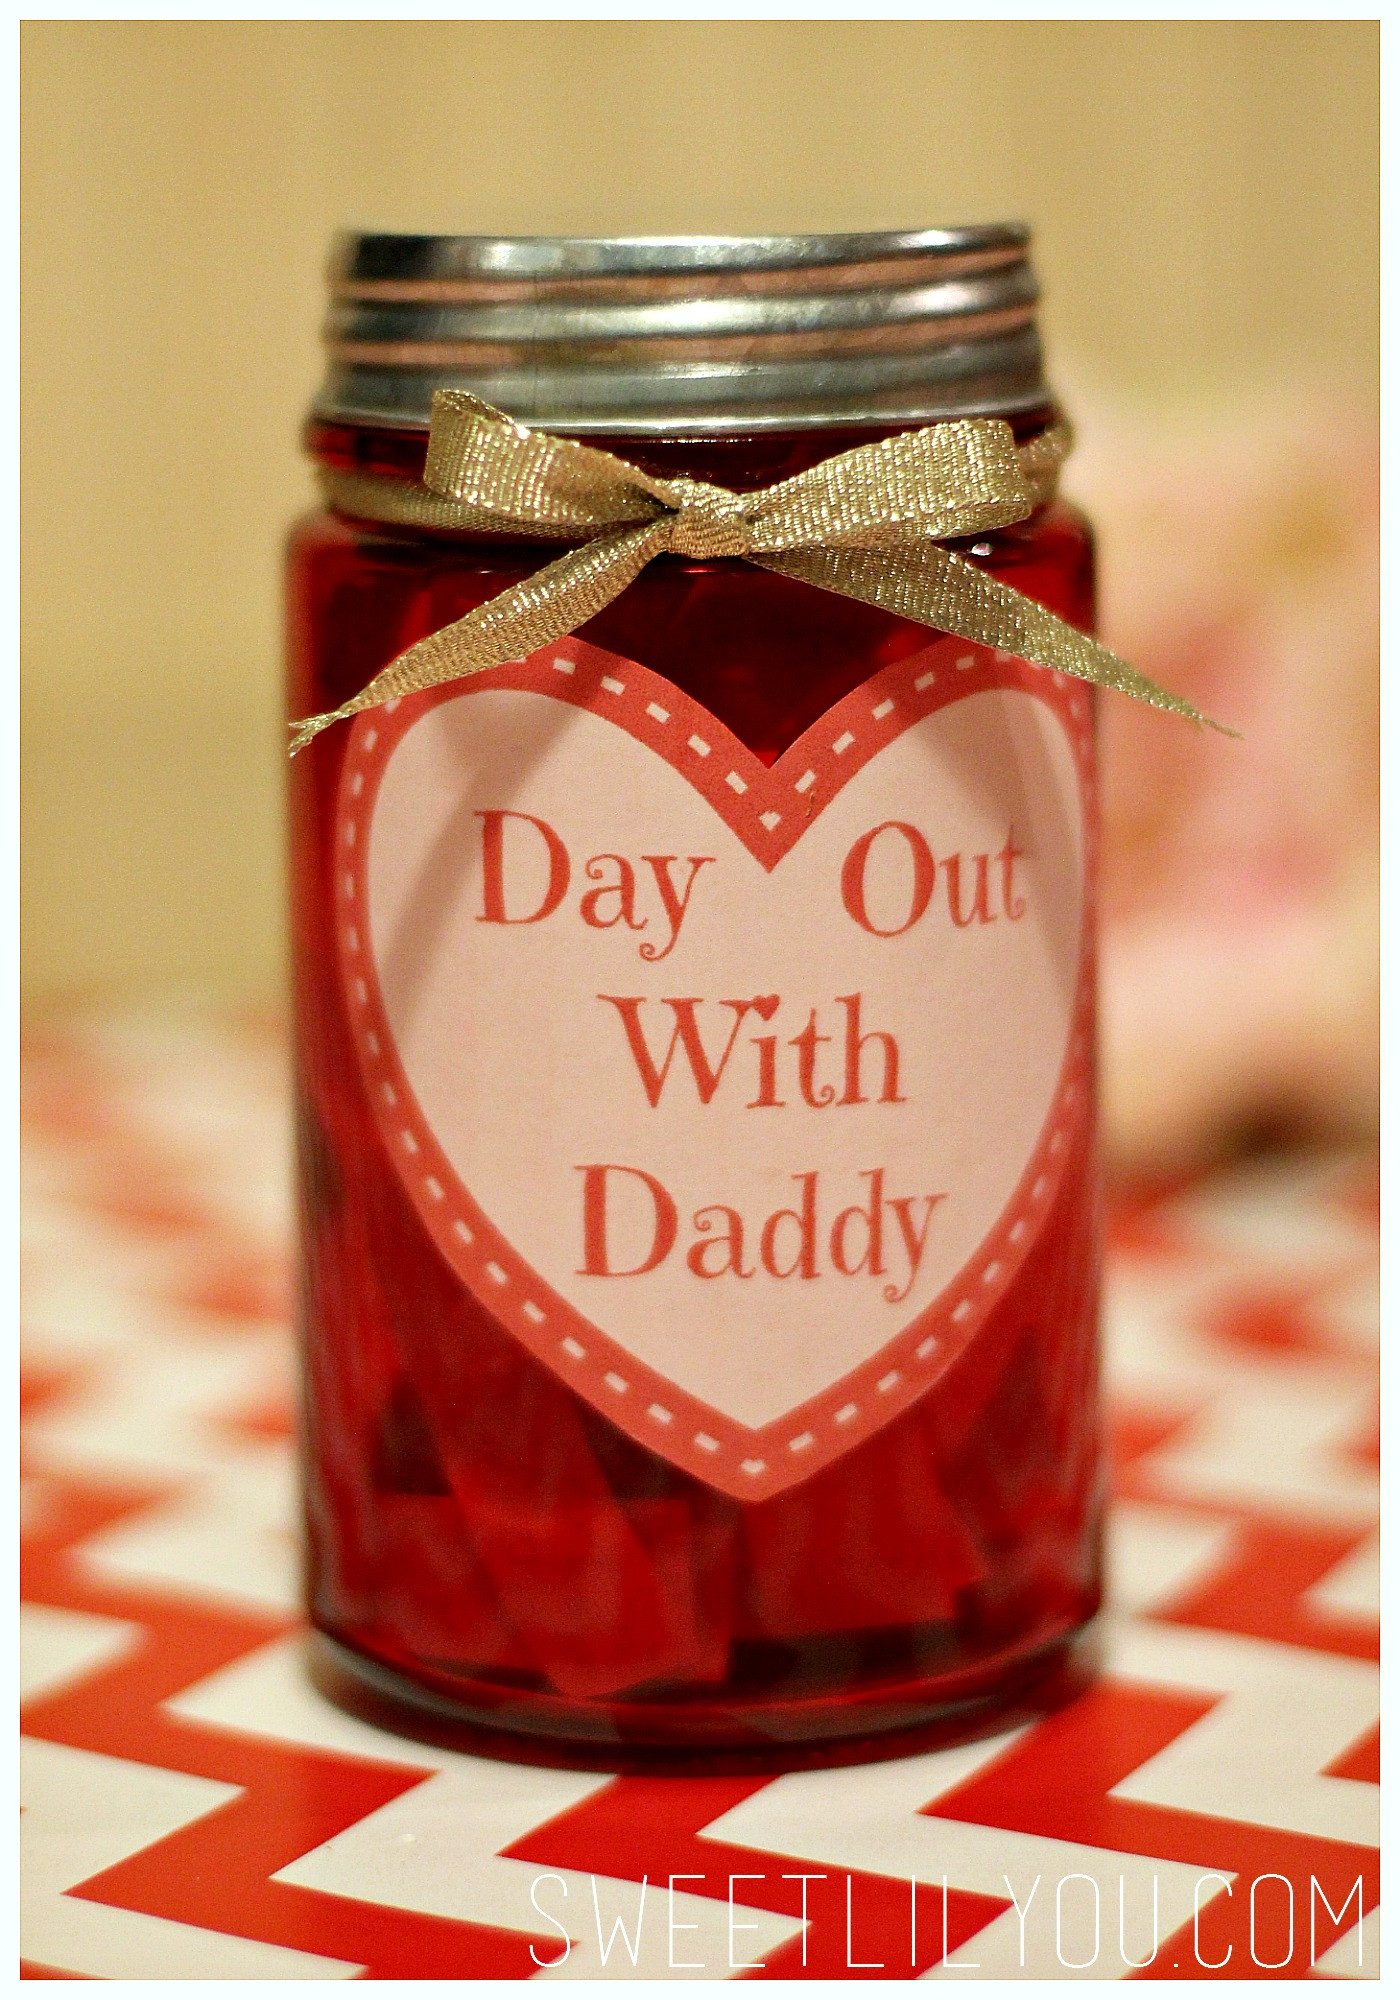 New Dad Valentines Day Gifts Inspirational Day Out with Daddy Jar Valentine S Day Gift for Dad